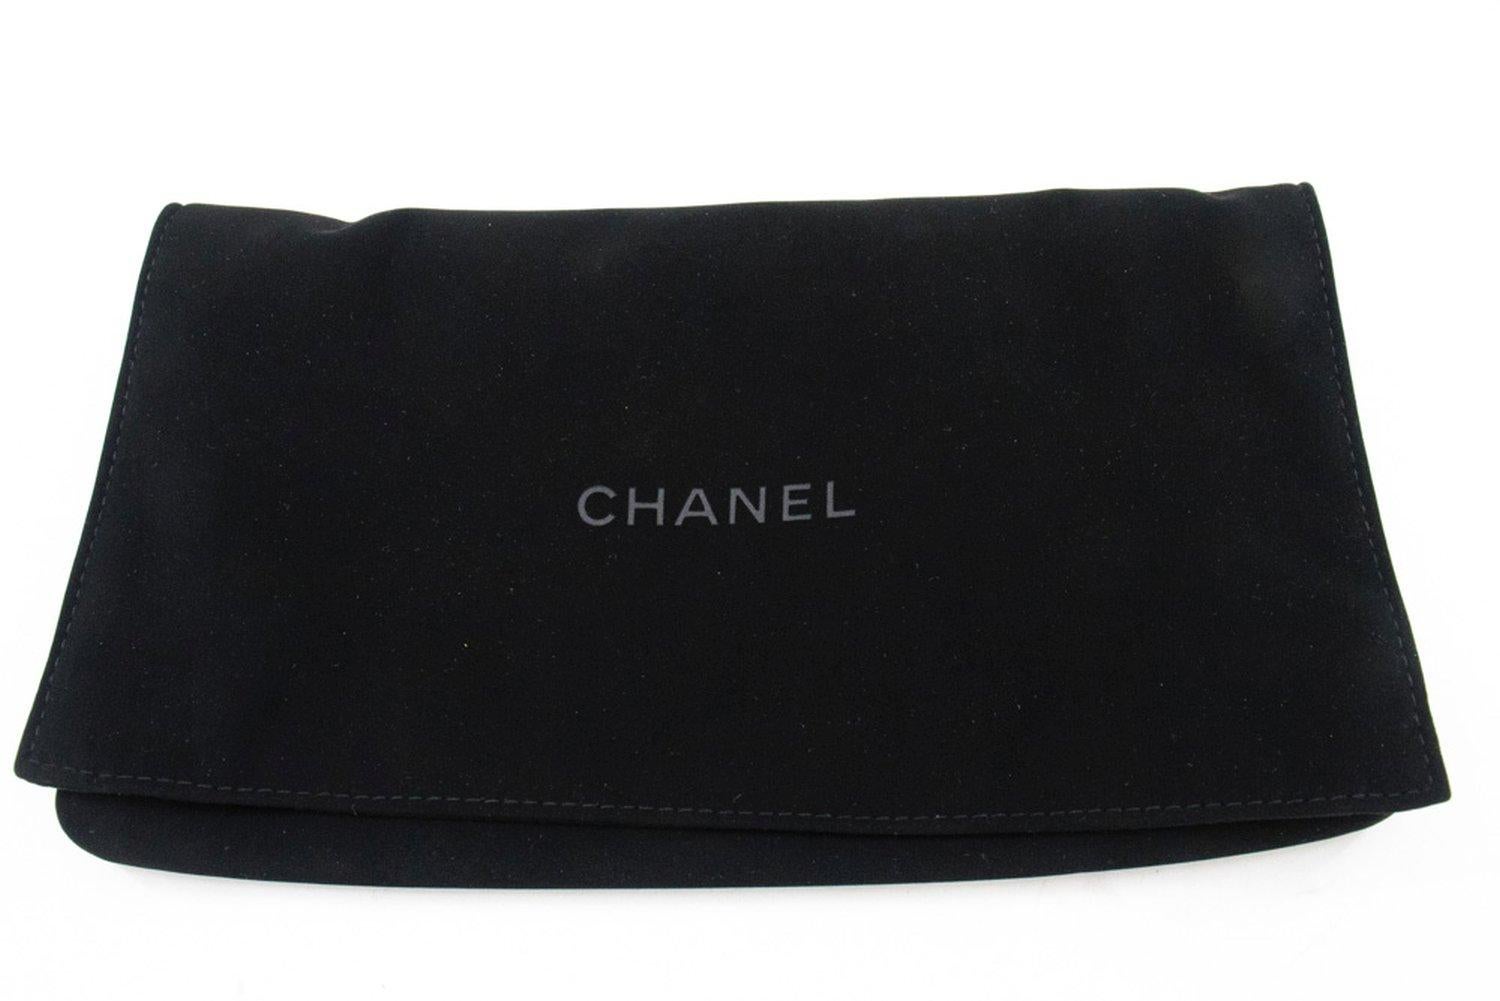 CHANEL Flap Phone Holder With Chain Bag Black Crossbody Clutch For Sale 15